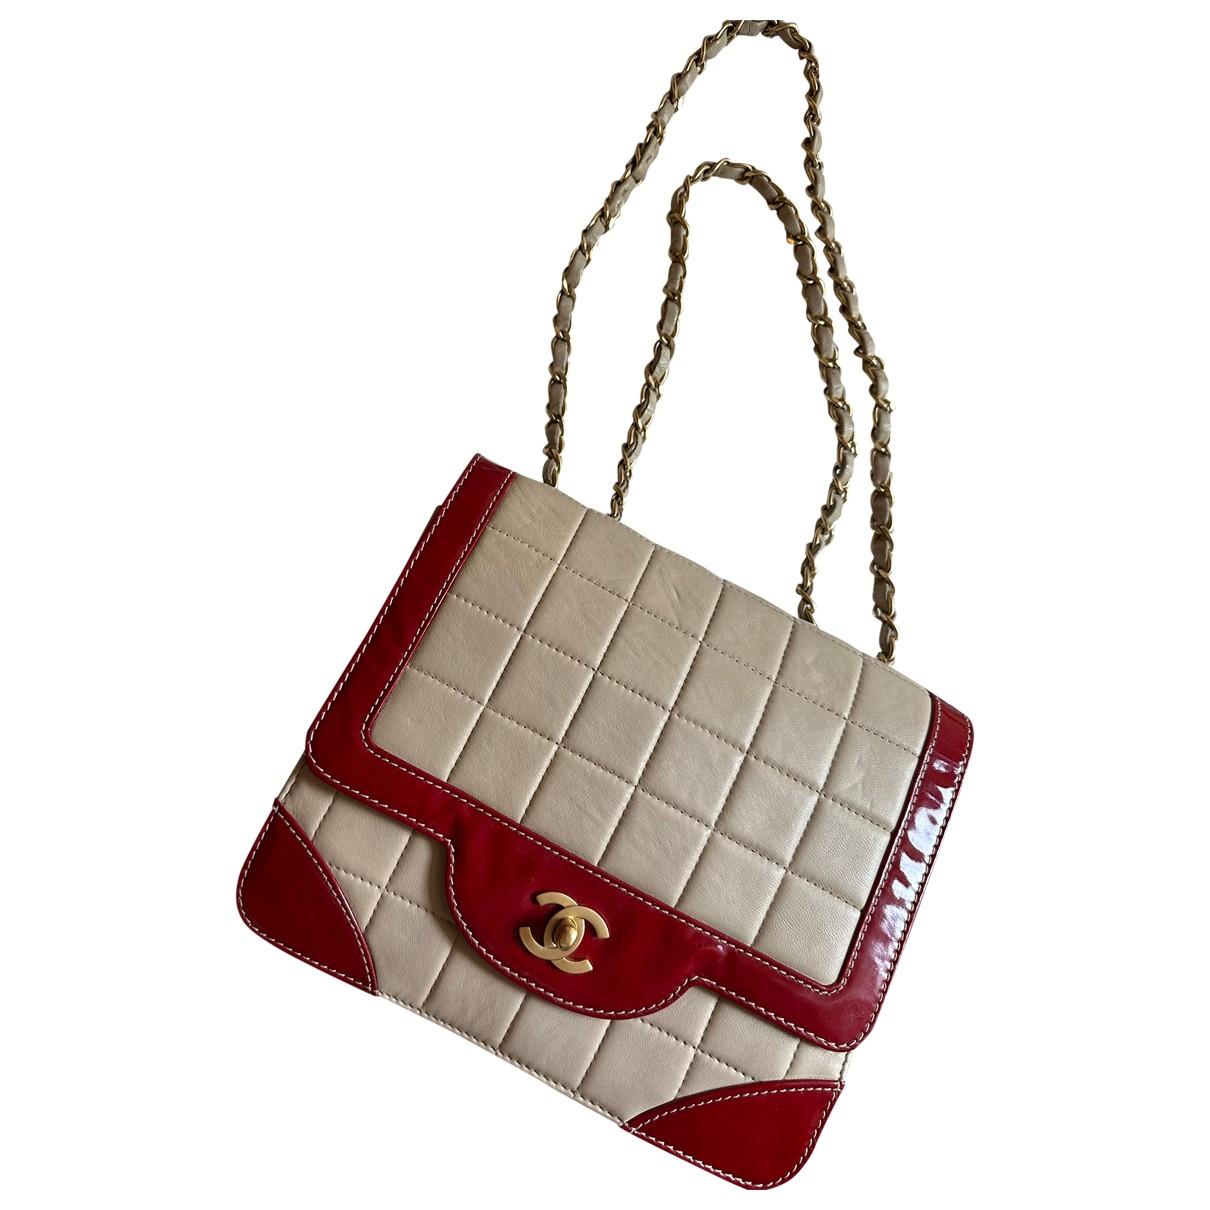 East west chocolate bar leather handbag Chanel Red in Leather - 18290650